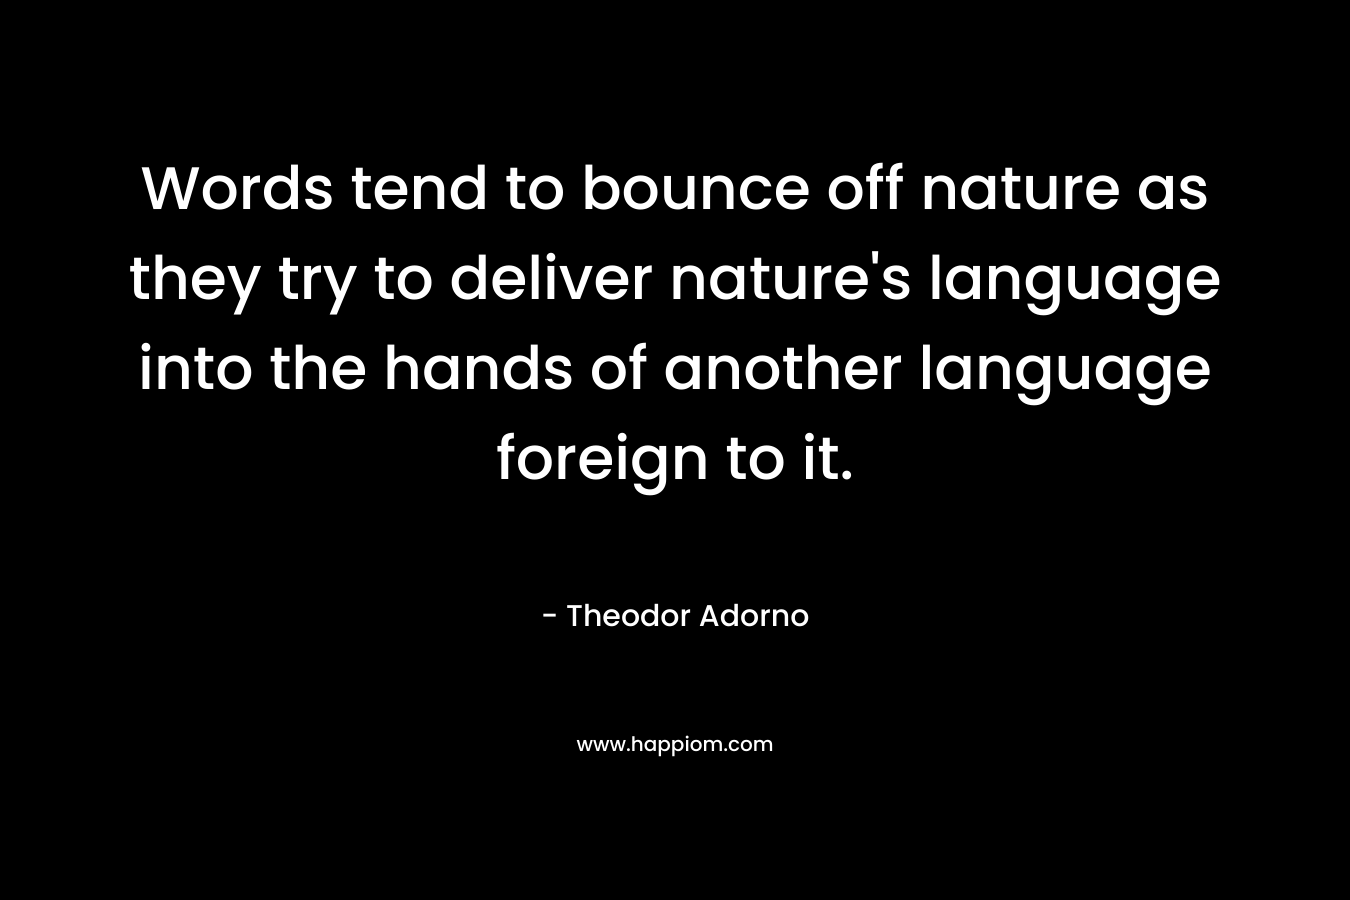 Words tend to bounce off nature as they try to deliver nature's language into the hands of another language foreign to it.